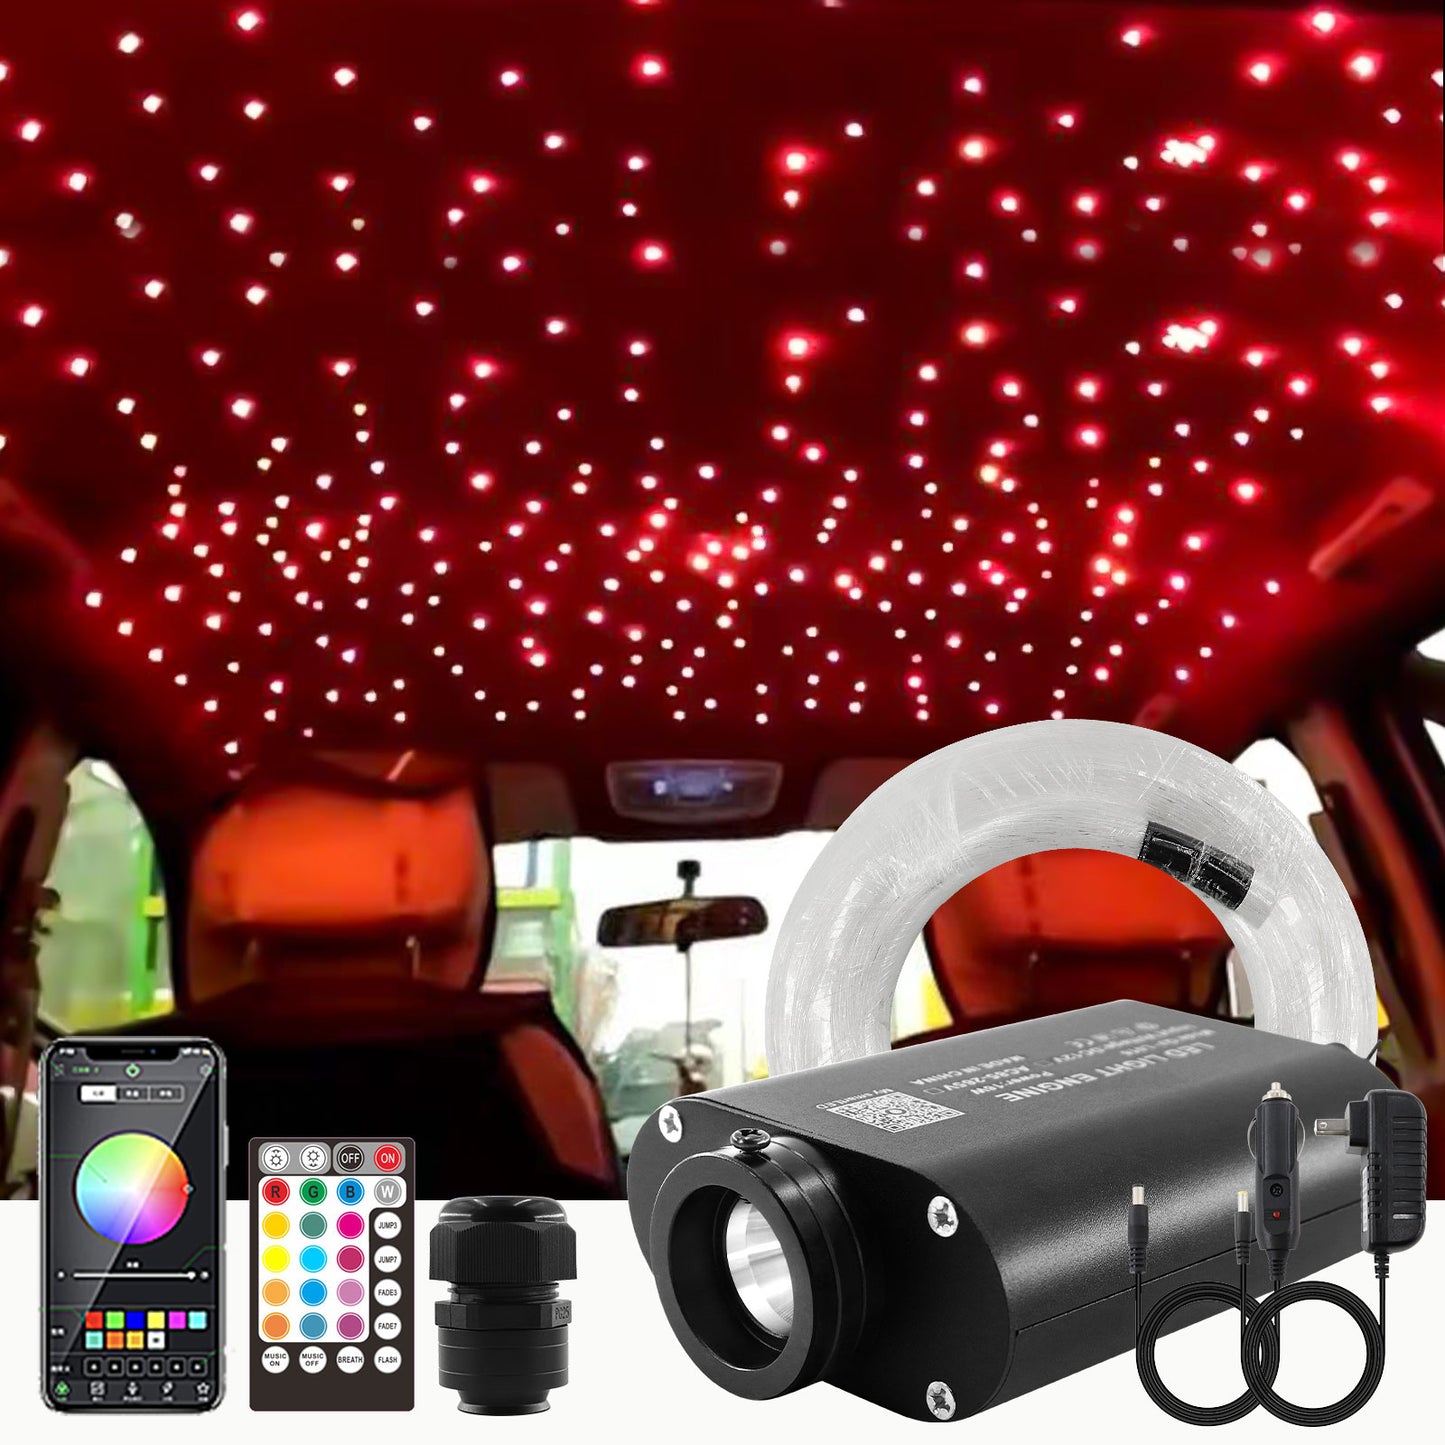 16W Rolls Royce Starlight Kit for Car Roof Decor,Car Roof Star Lights with 28-Key RF Remote/Bluetooth Control & Sound Activated